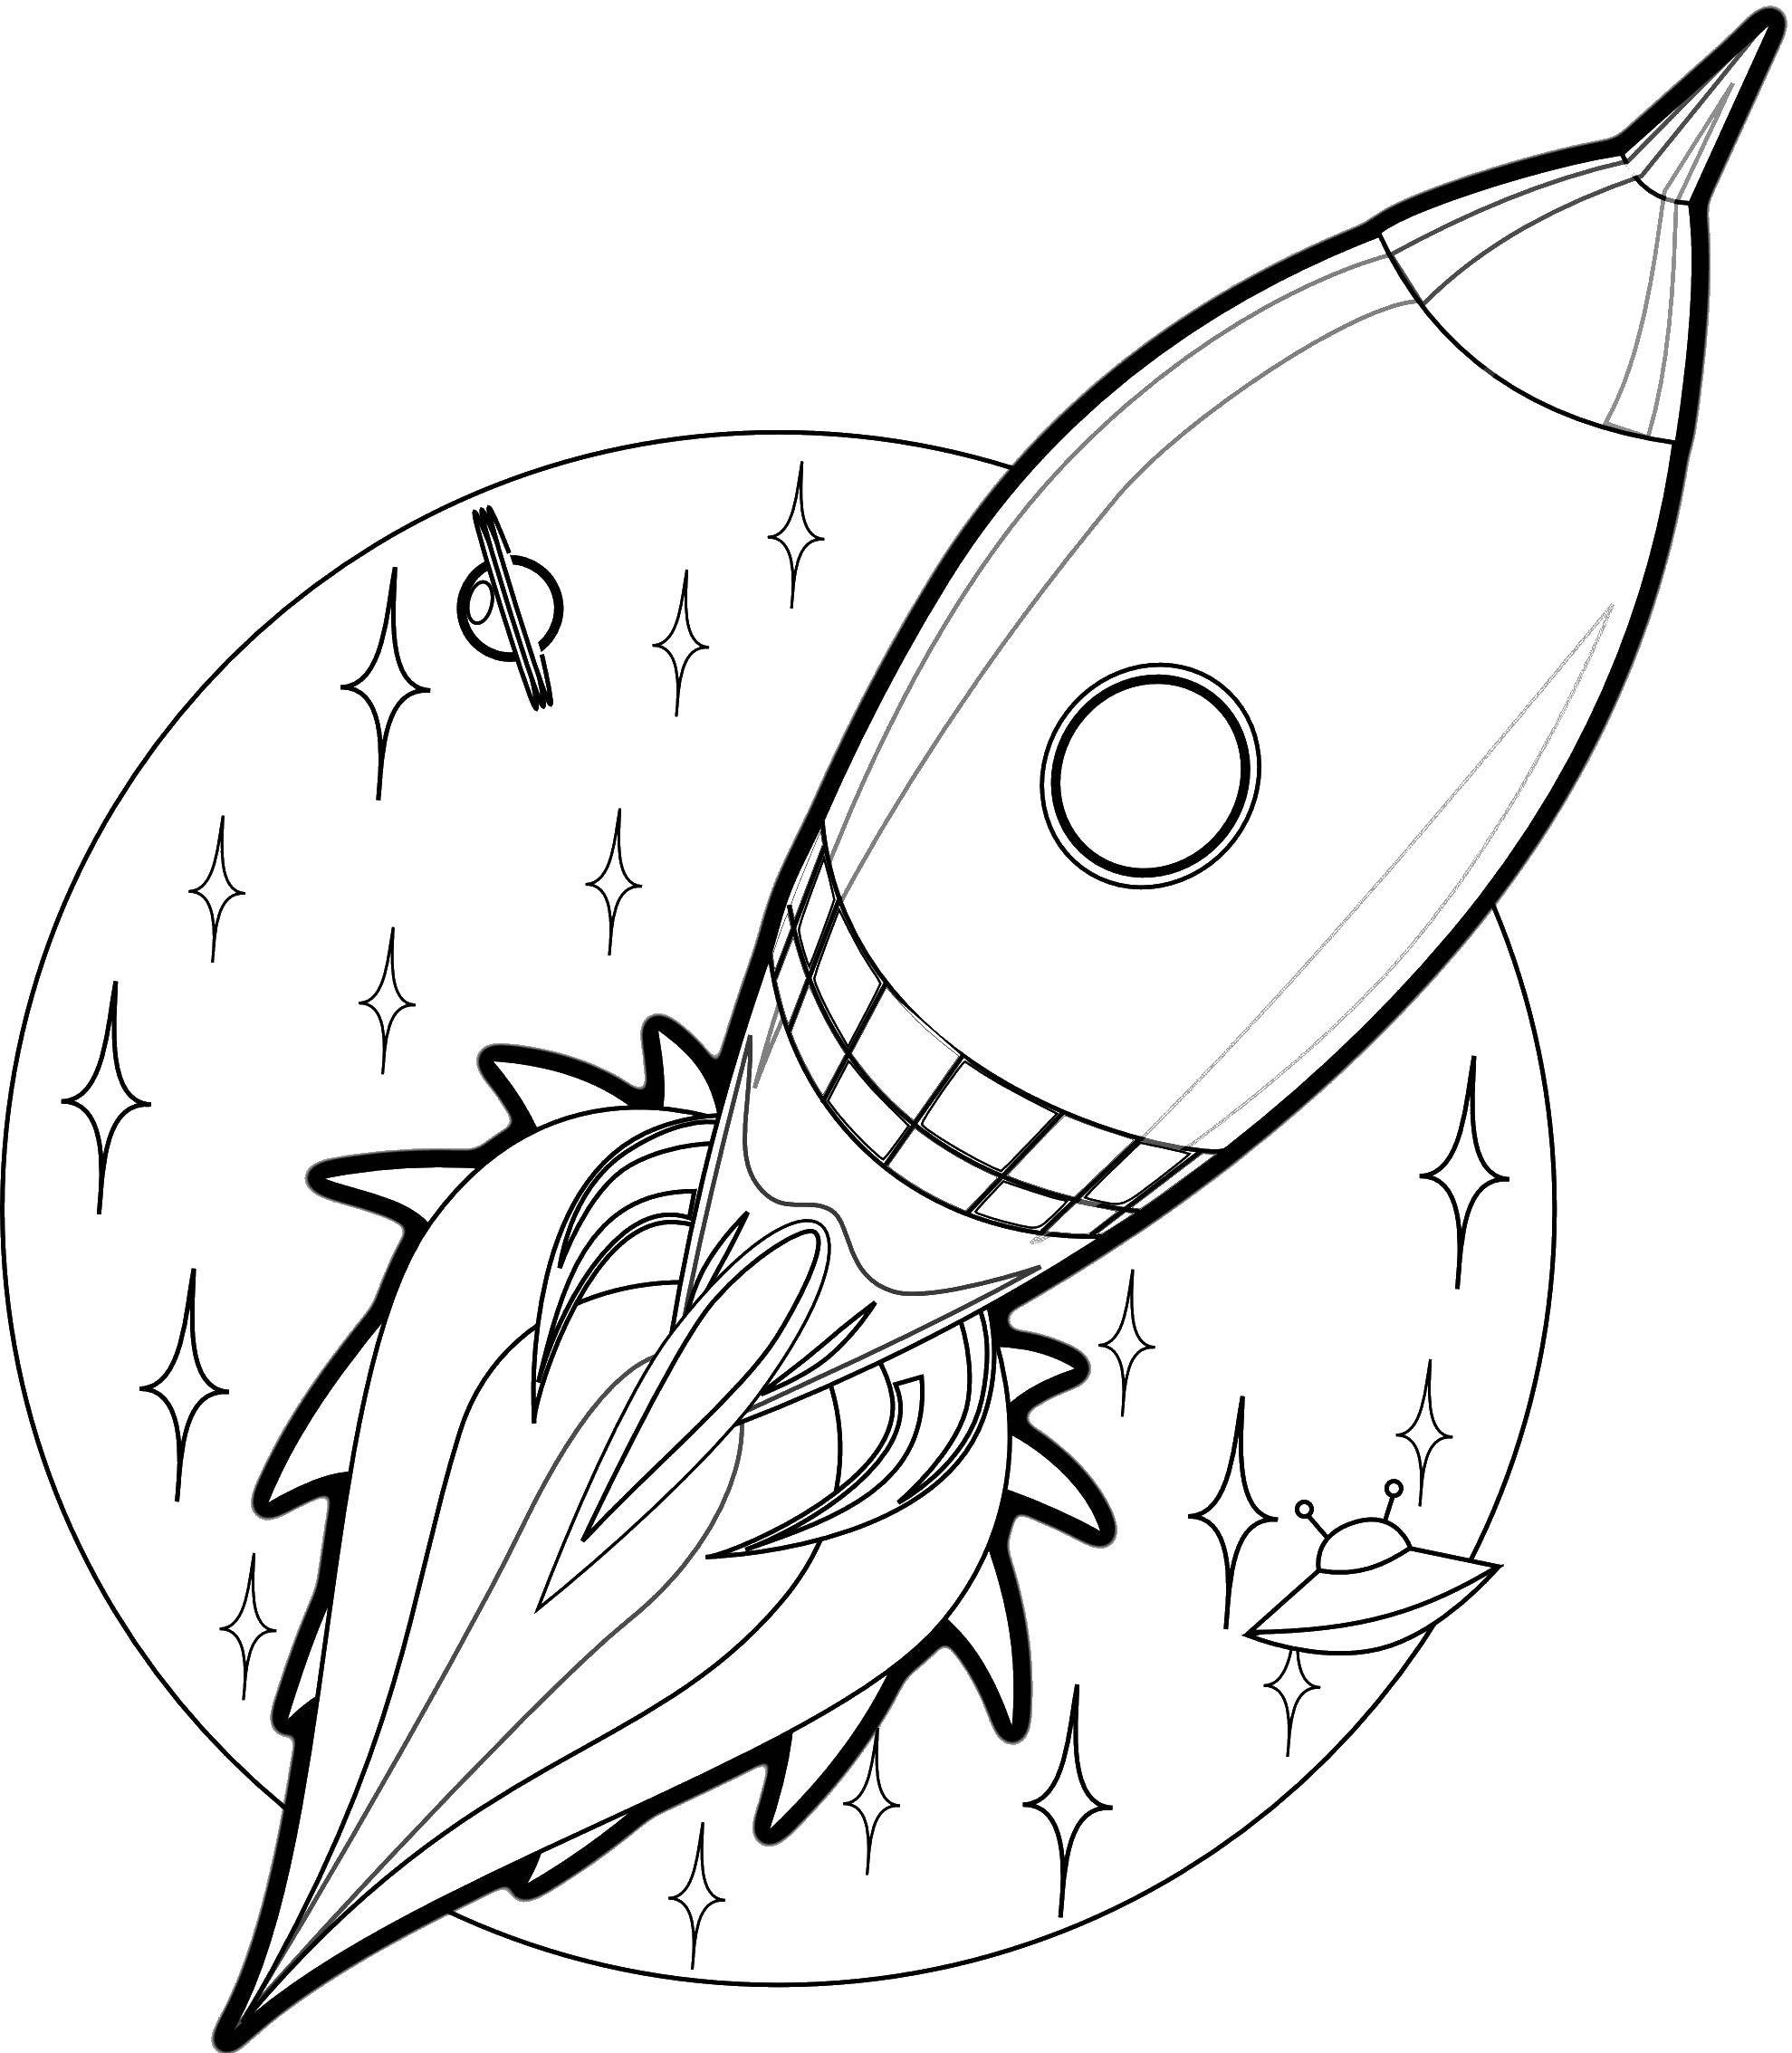 Coloring The rocket on the planets. Category rockets. Tags:  rocket, space, rocket, sky.